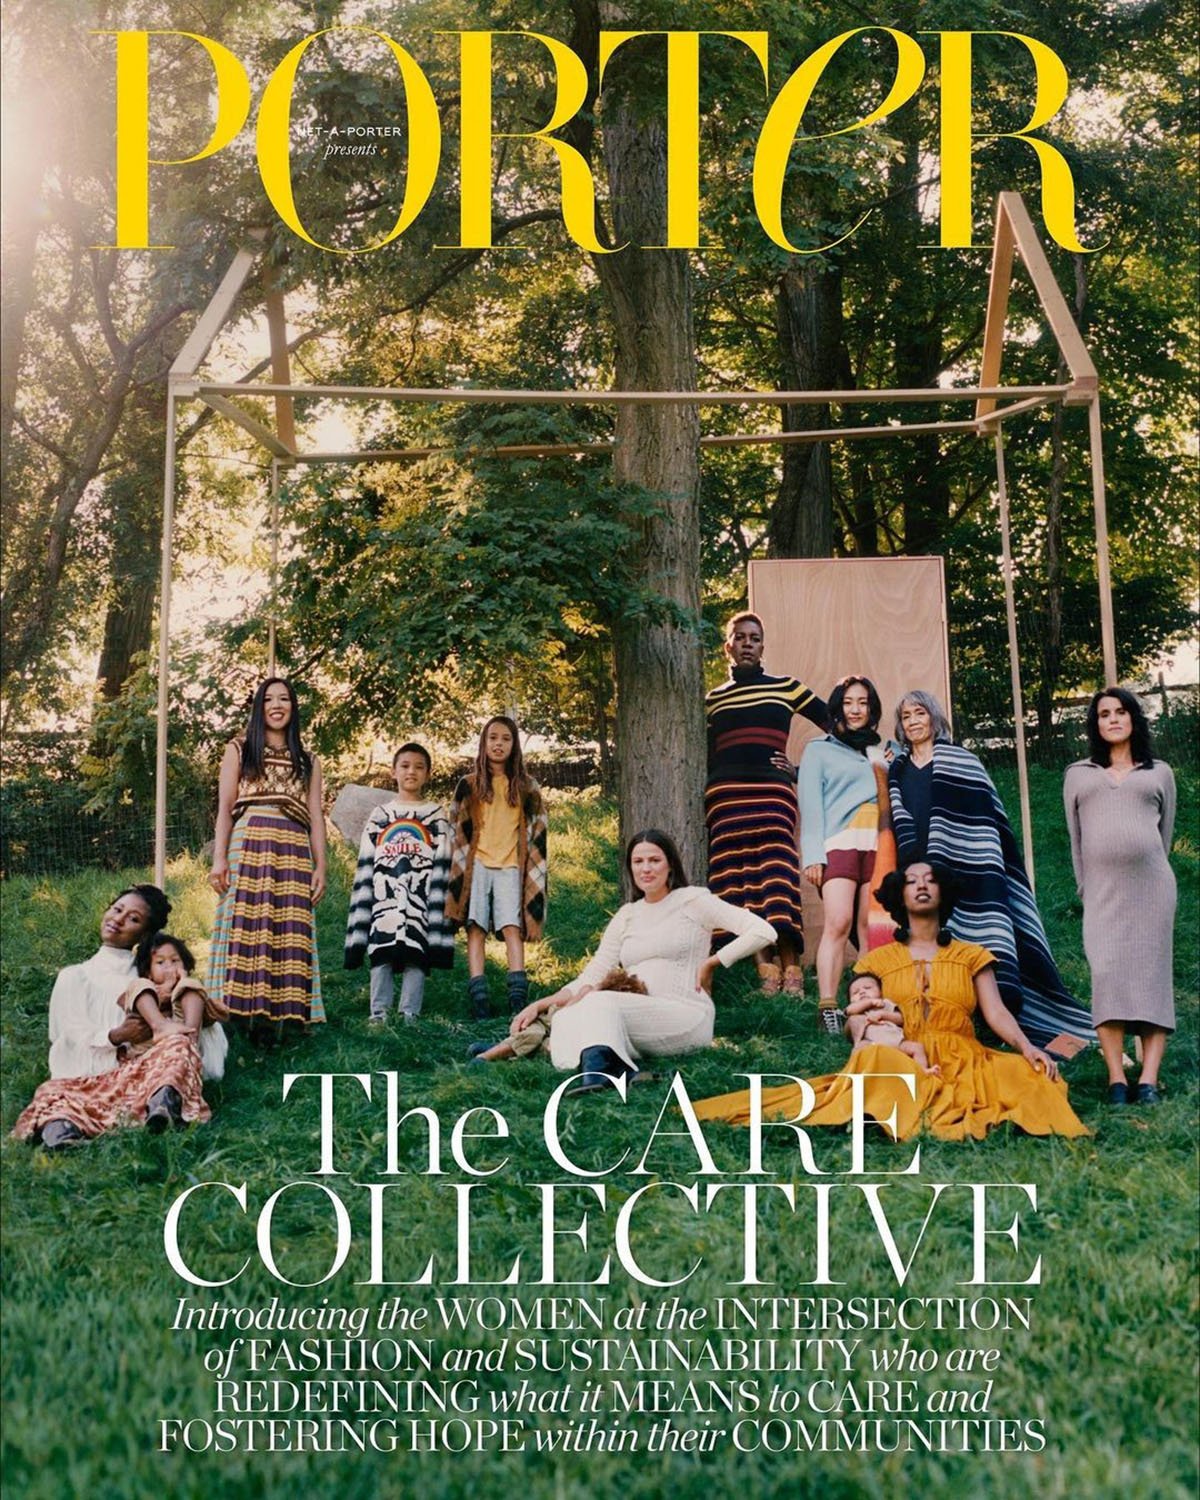 Porter-Magazine-August-23rd-2021-covers-by-Camila-Falquez-1.jpg